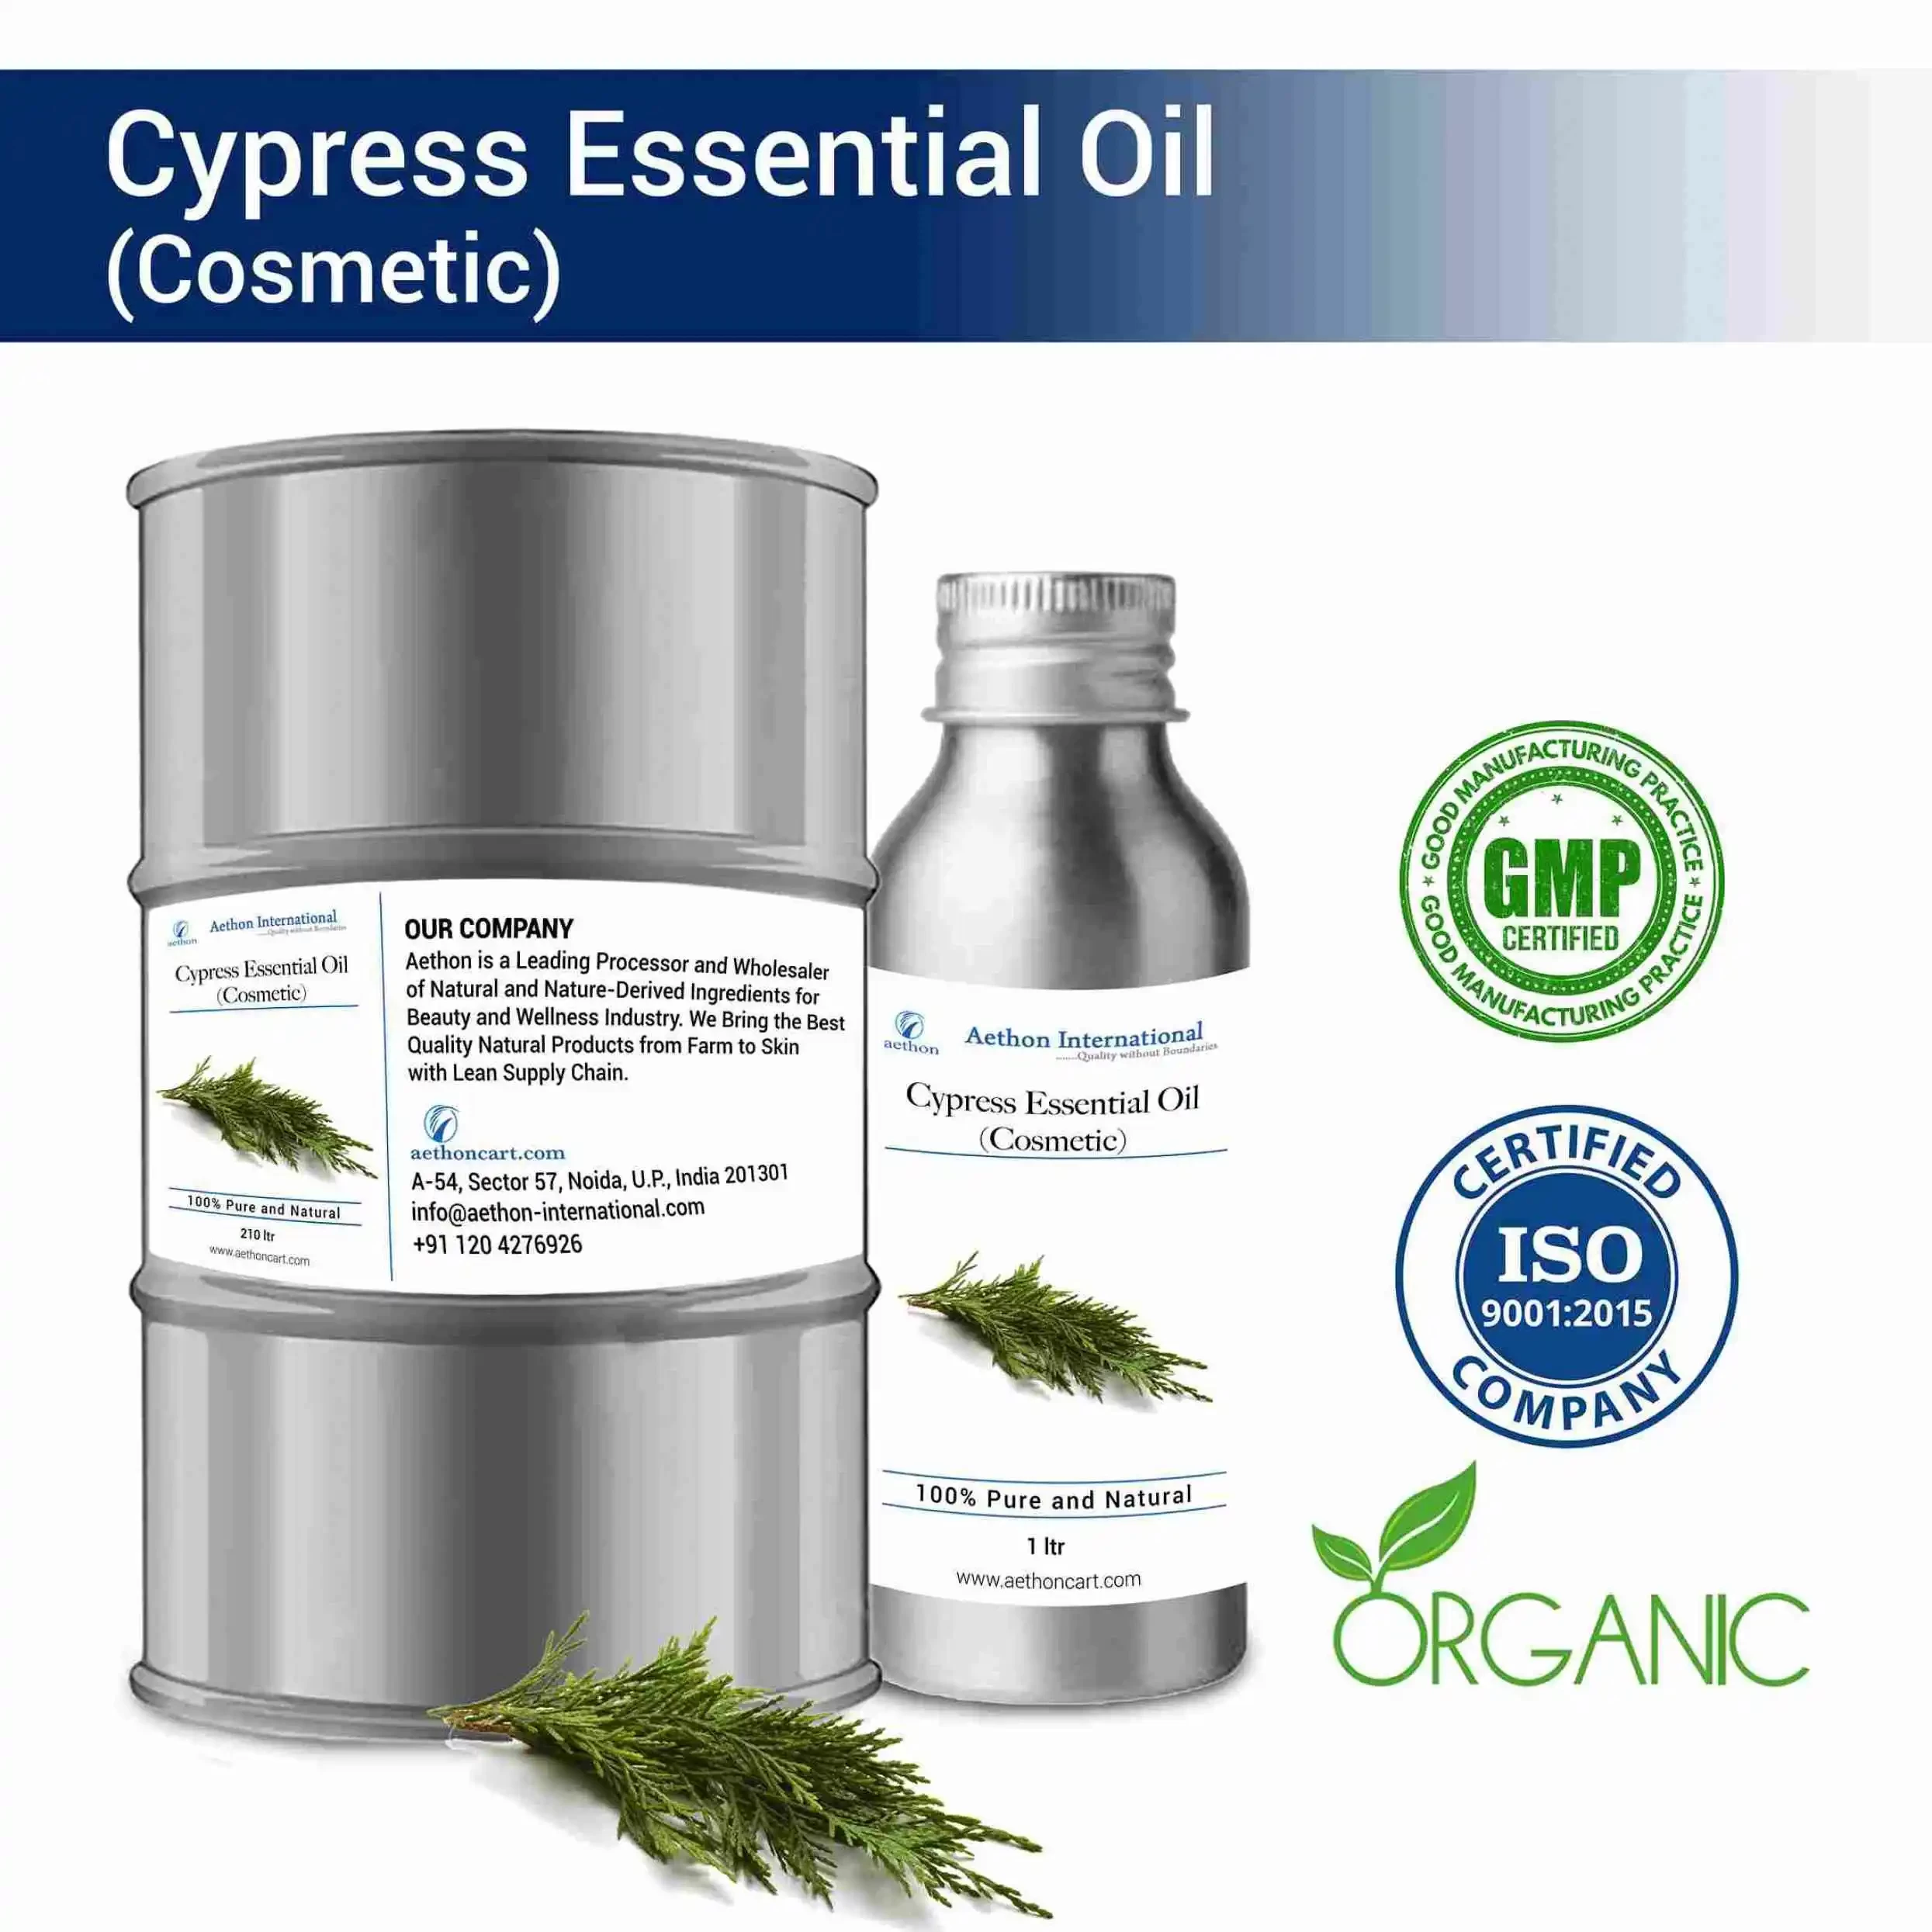 Cypress Essential Oil (Cosmetic)